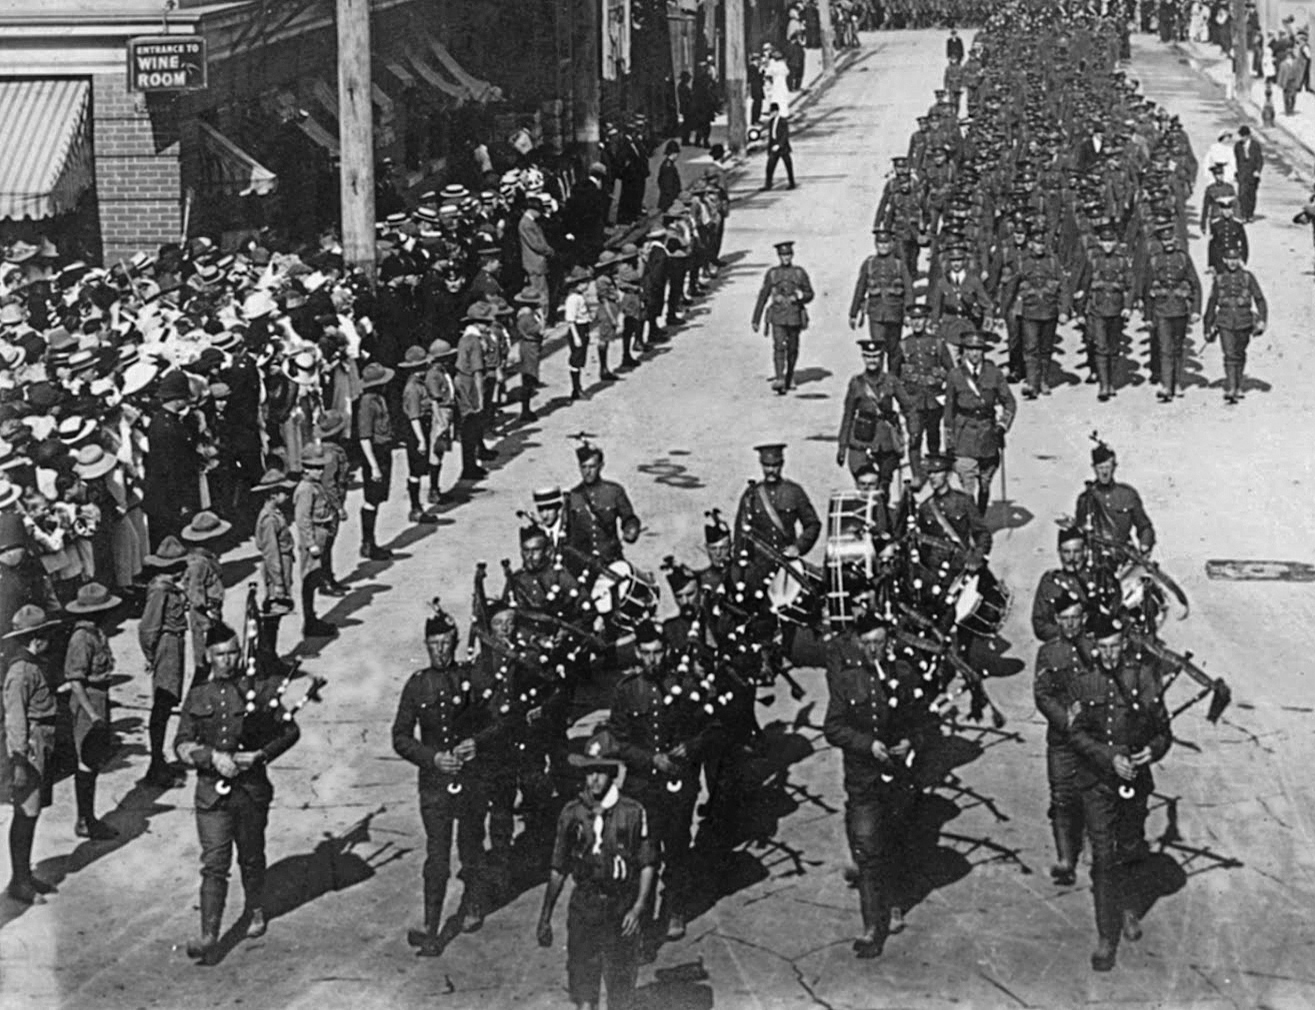 Princess Patricia’s Canadian Light Infantry troops march through Ottawa on their way to Grand Trunk Central Station and, ultimately, the Western Front in August 1914. Of 1,089 men in that initial cohort, only 44 survived the war. (Library and Archives Canada)